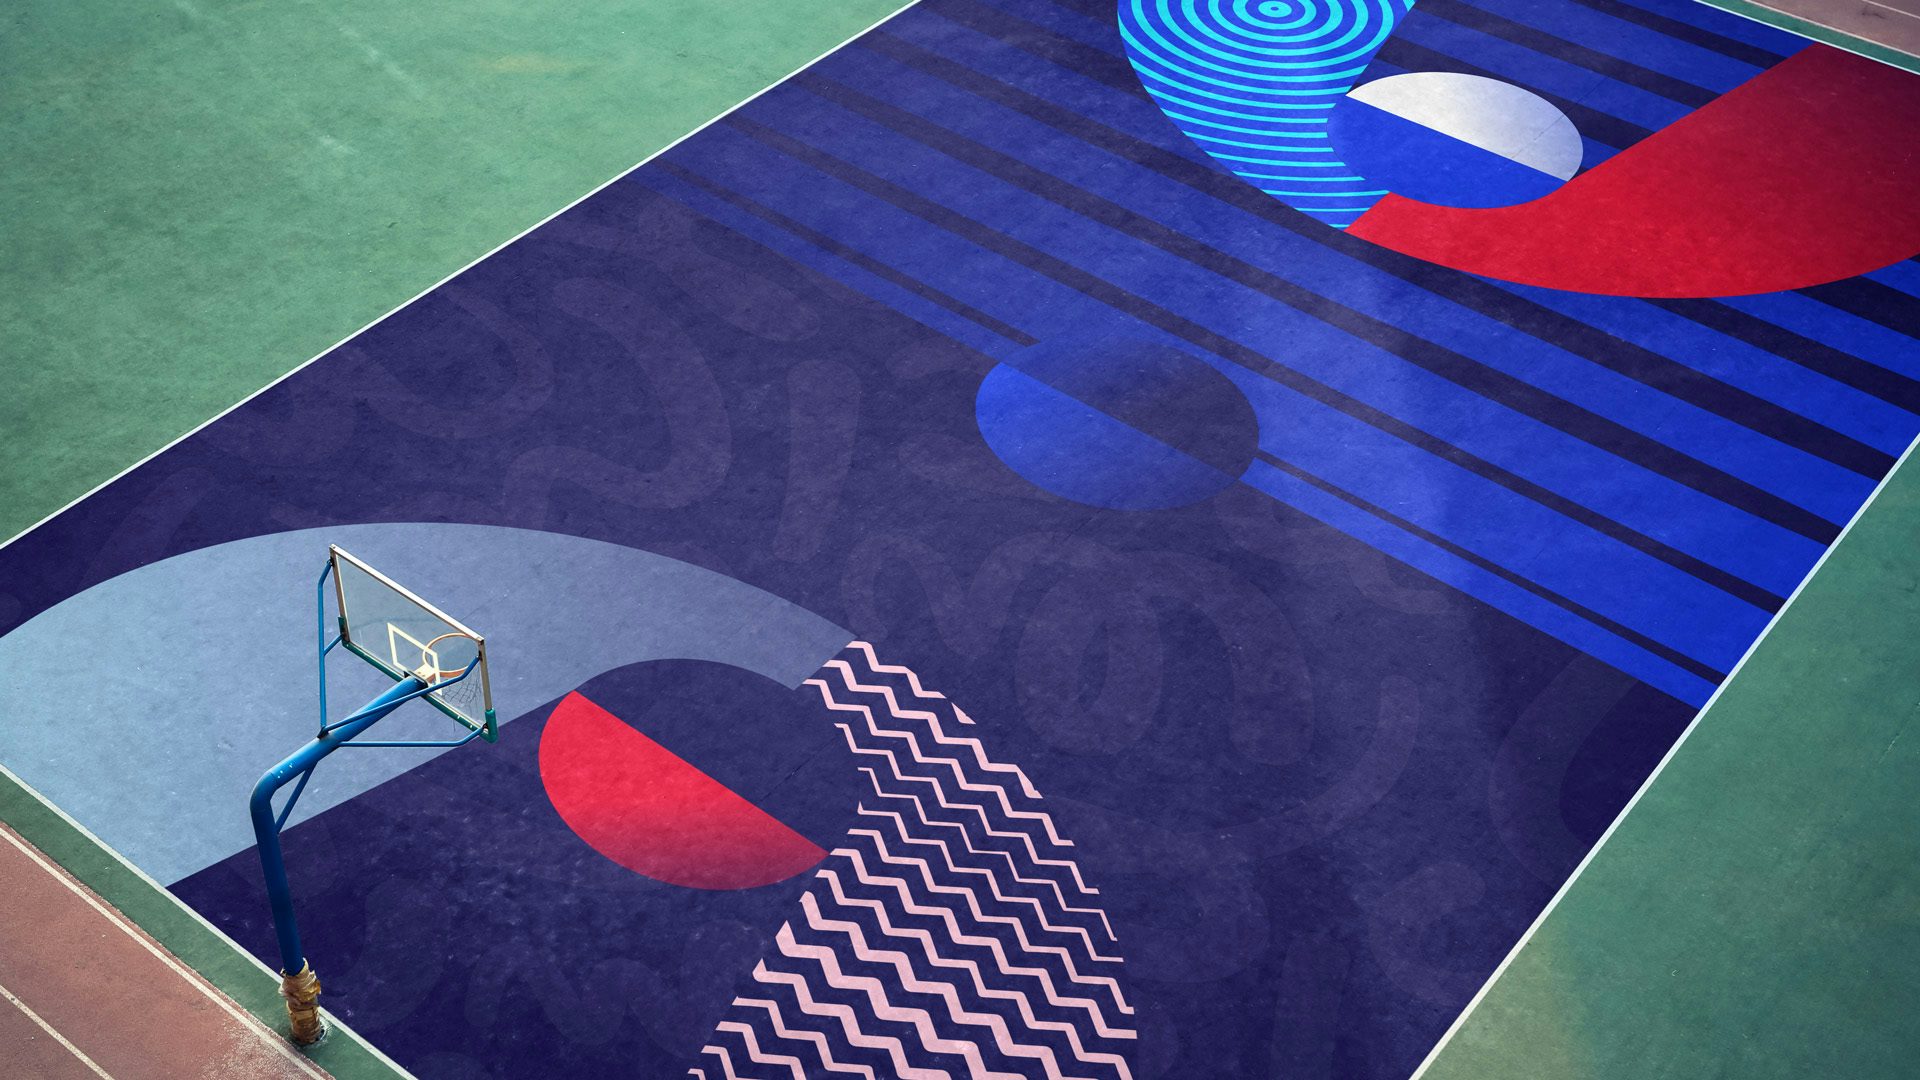 Aerial photo of a basketball court decorated in the style of the Team GB rebrand, with blue, red, white, and pink graphic patterns